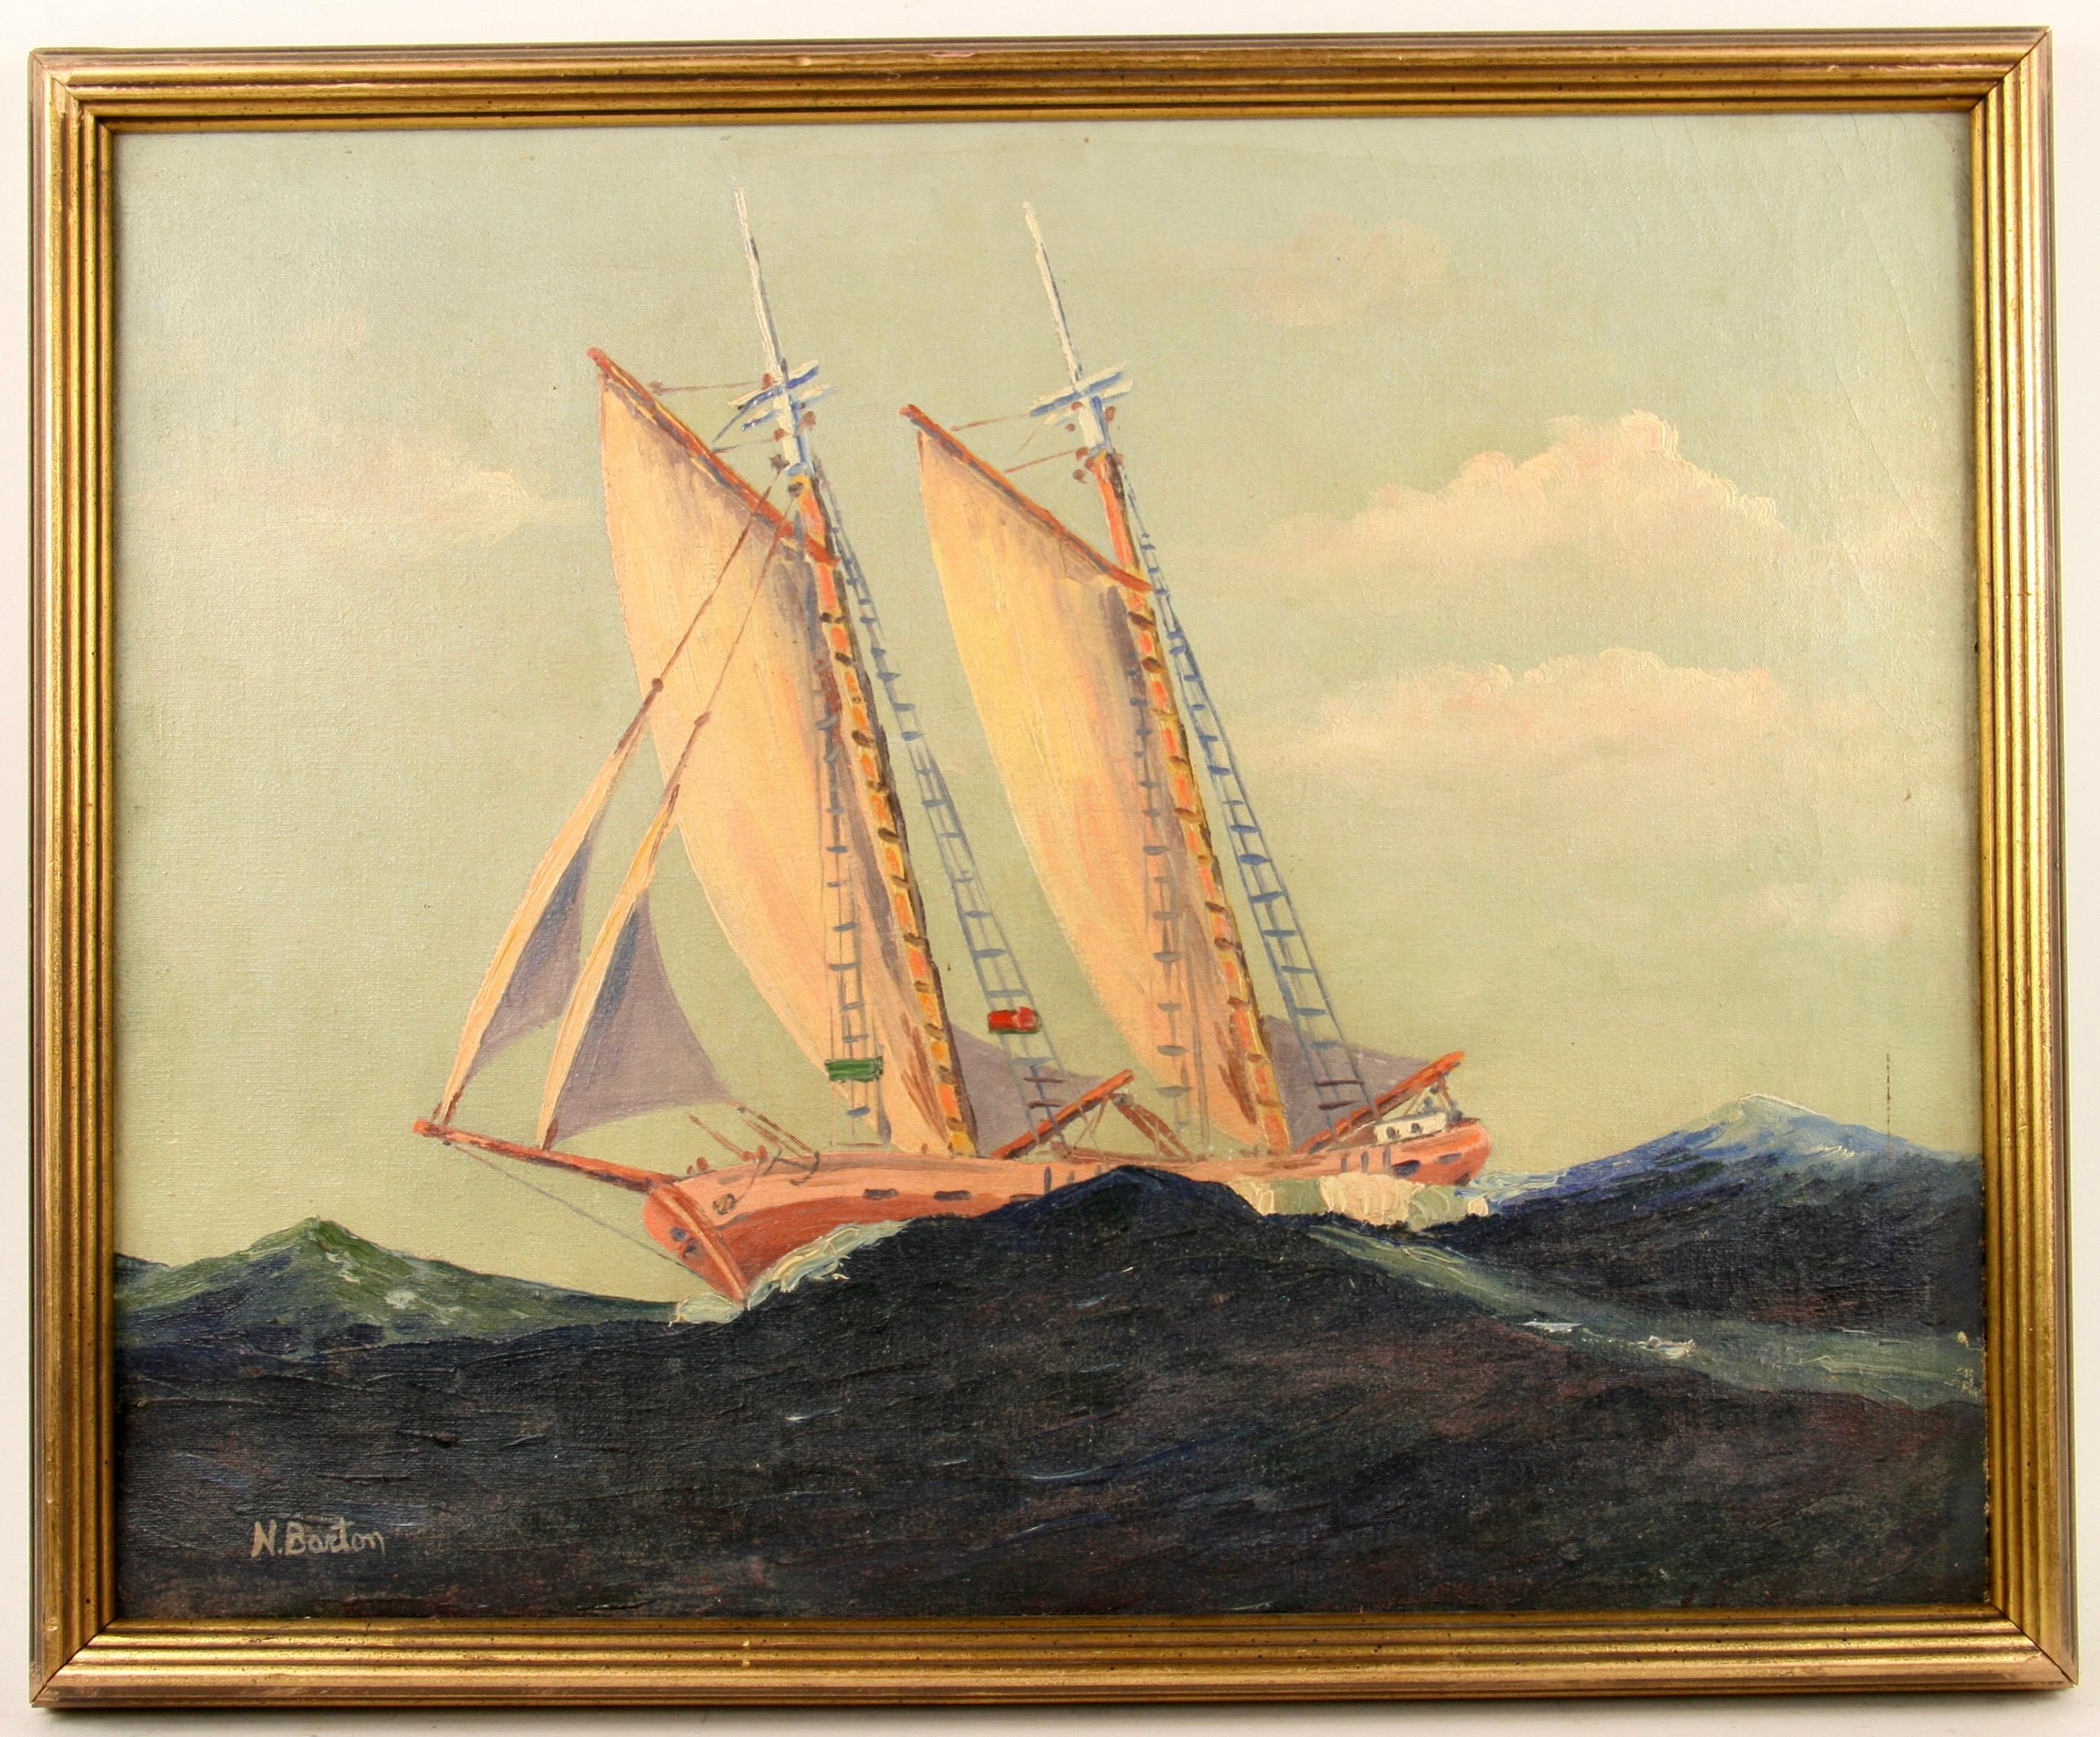 N.Barton Landscape Painting - Sailing  in Rough Waters Seascape  Painting